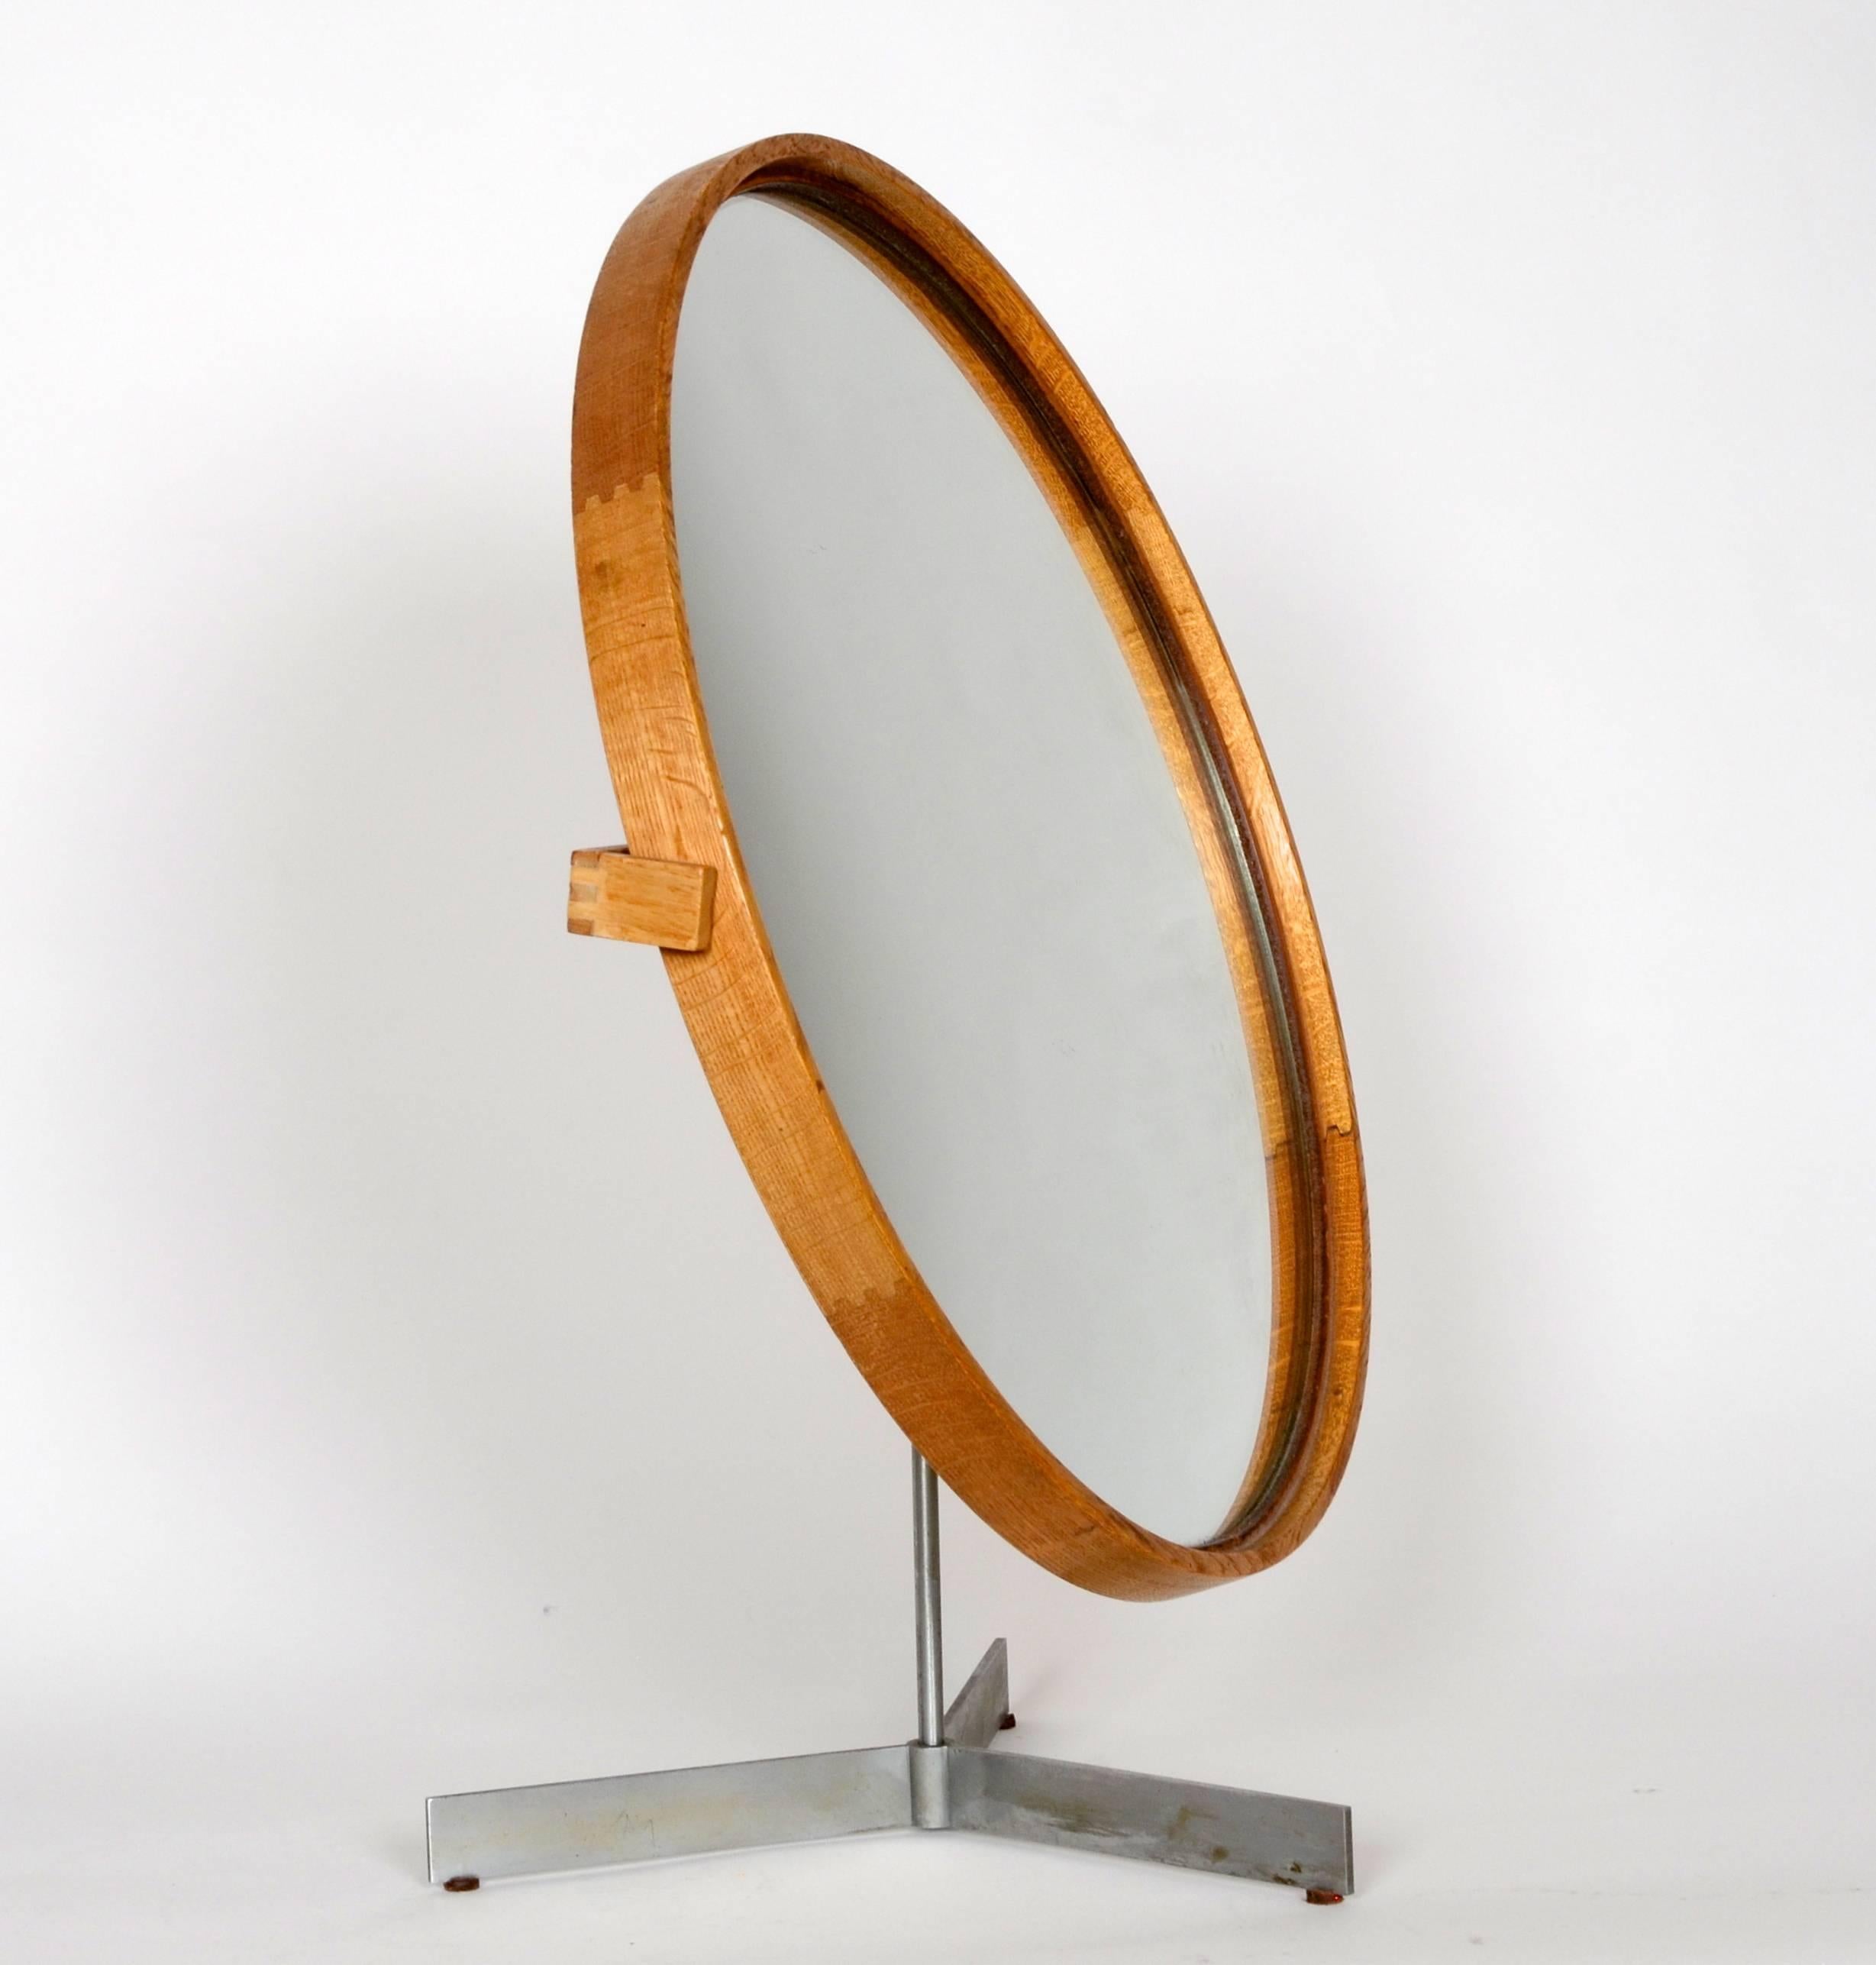 Table mirror in oak and stainless steel, designed by Uno & Östen Kristiansson for Luxus, Sweden, 1960s.